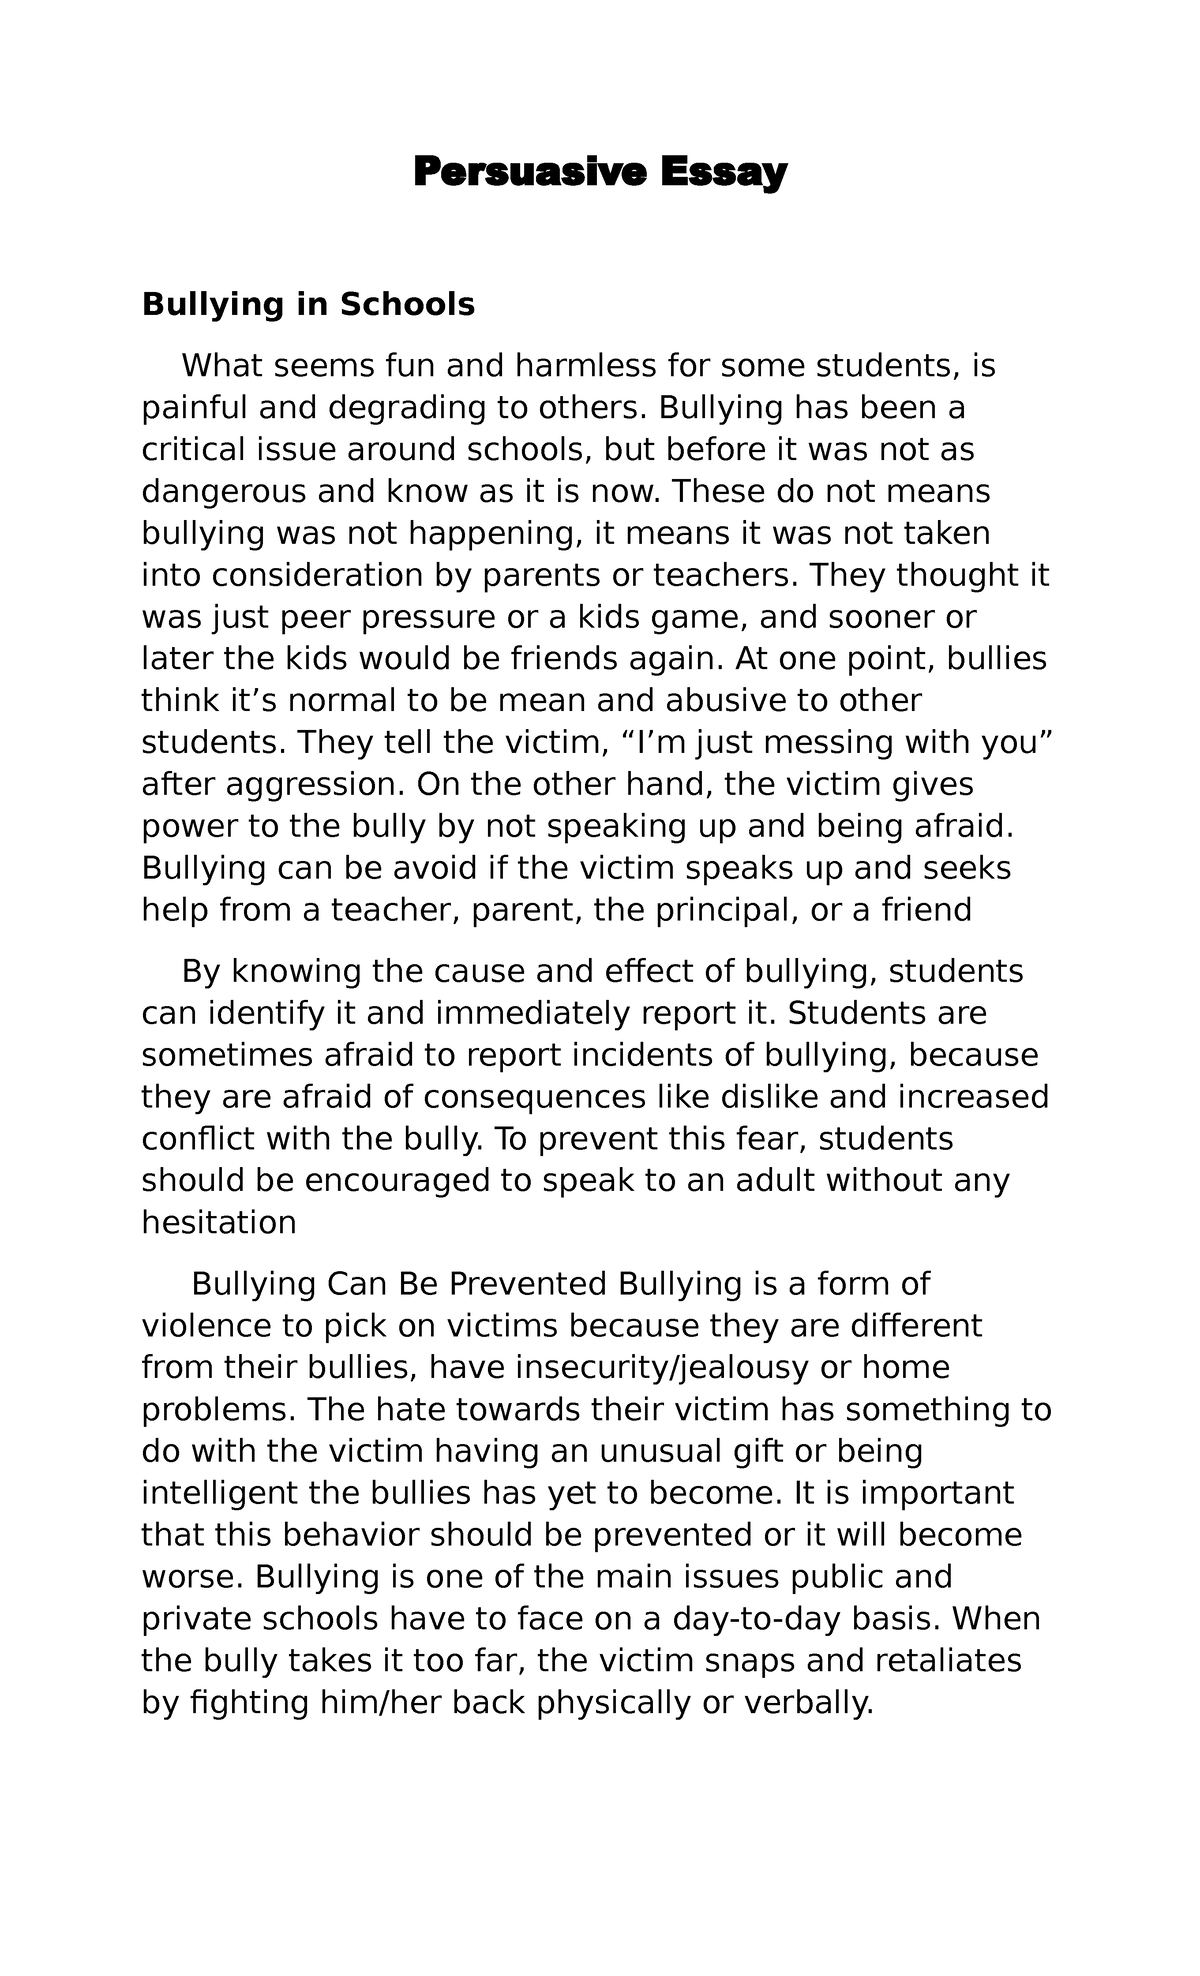 how to prevent bullying essay